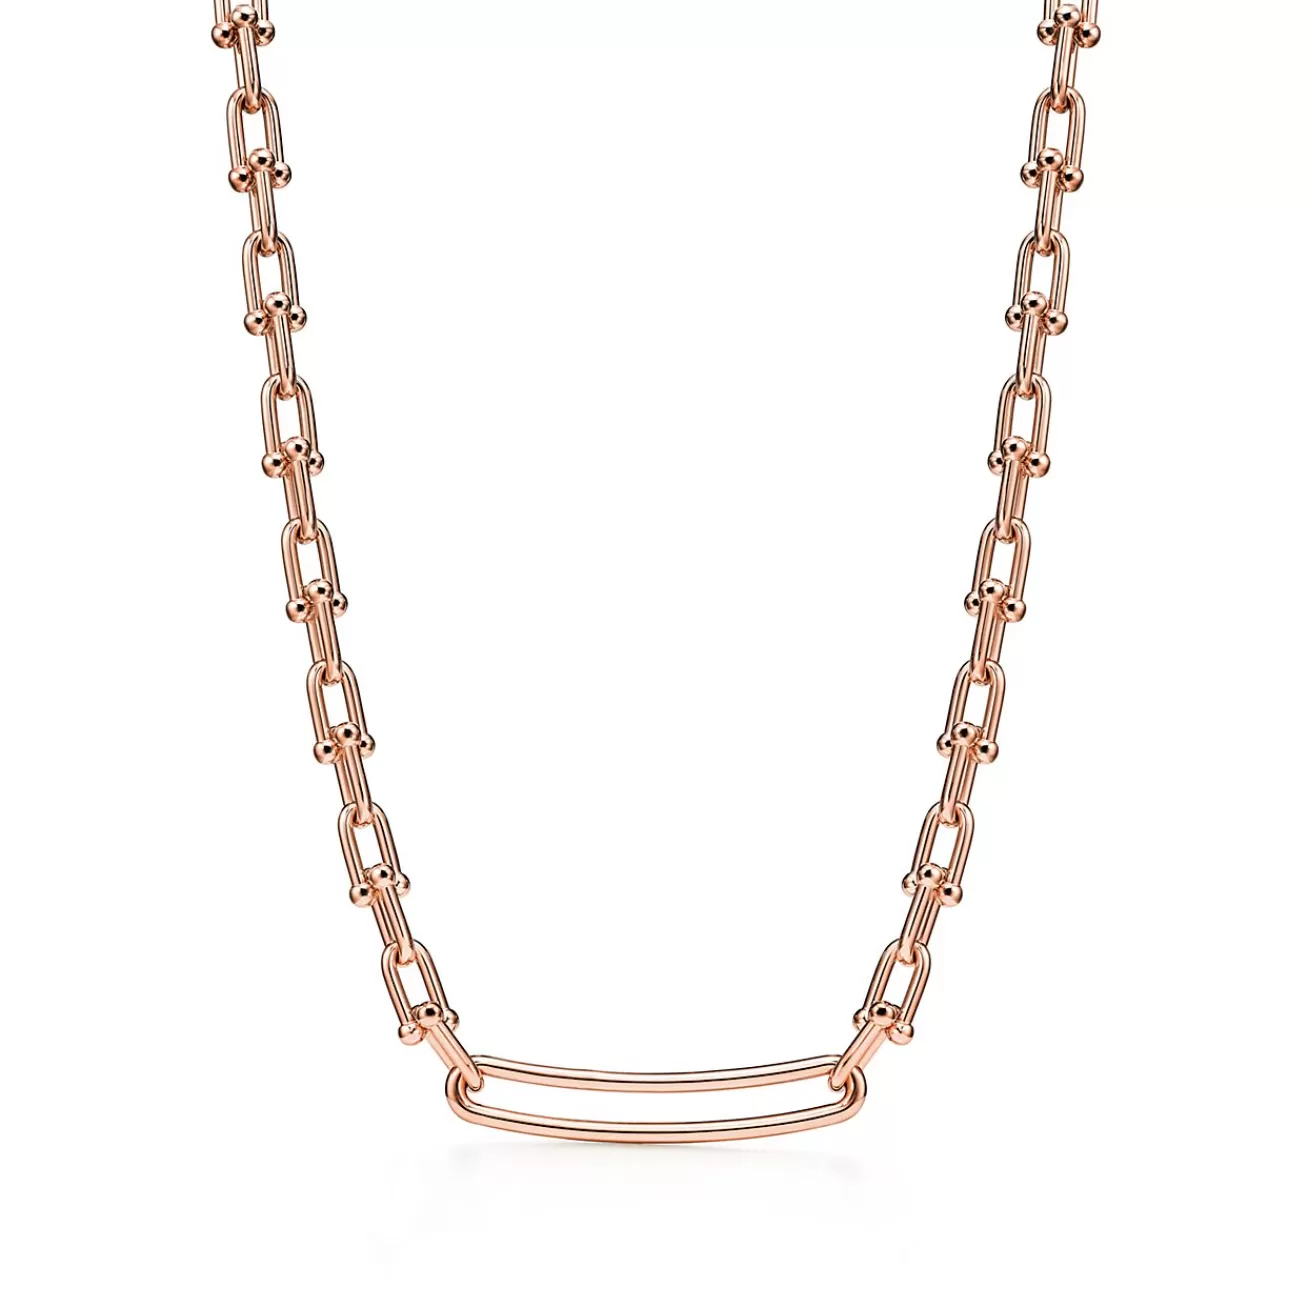 Tiffany & Co. Tiffany HardWear Elongated Link Necklace in Rose Gold | ^ Necklaces & Pendants | Men's Jewelry